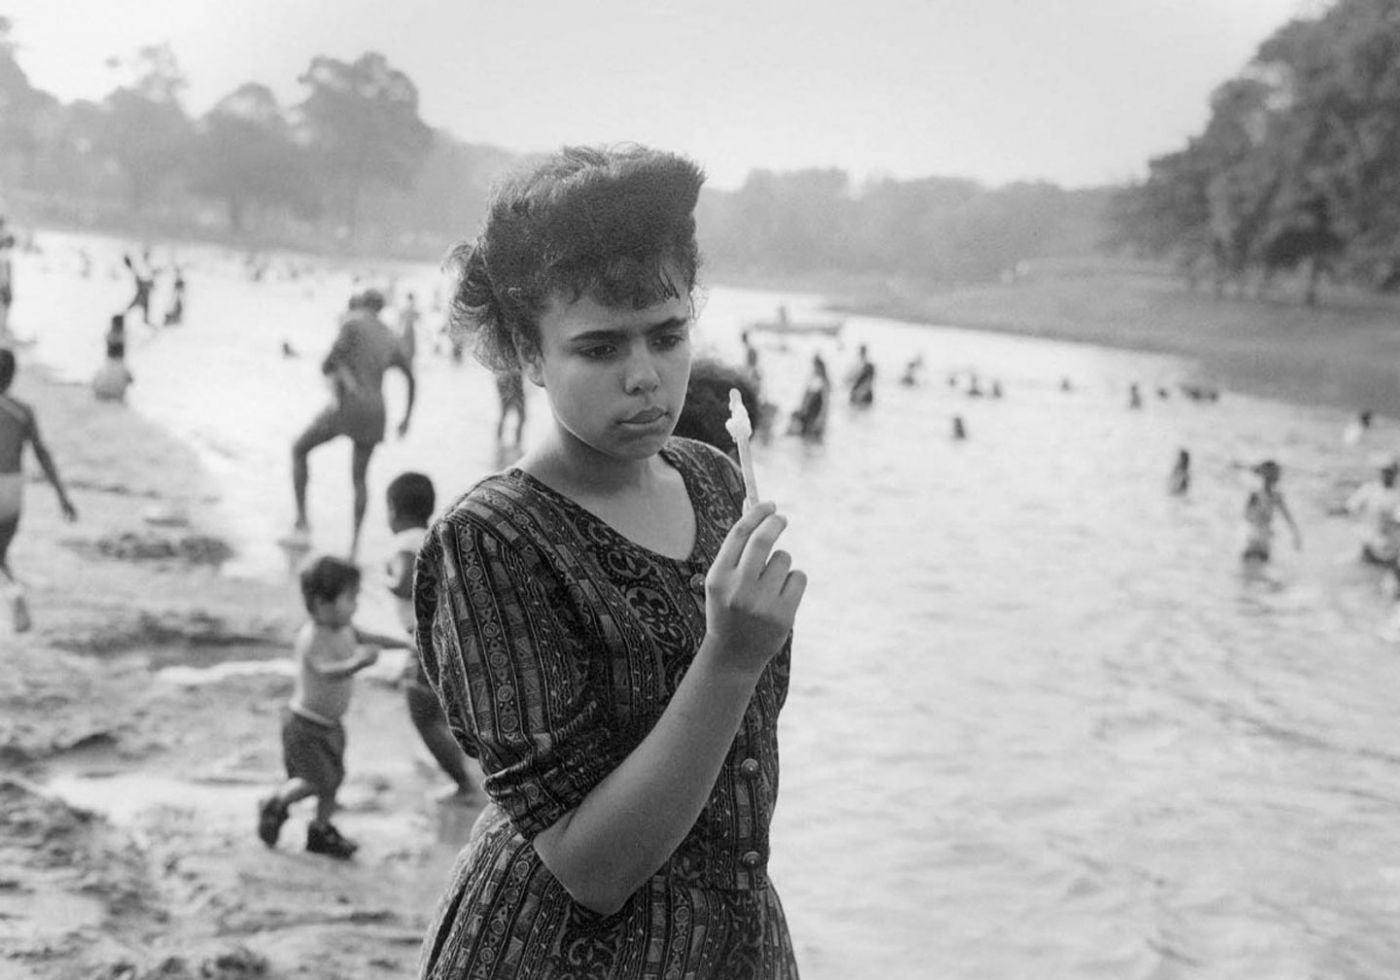 Mark Steinmetz: Summertime, Special Limited Edition (with Gelatin Silver Print)